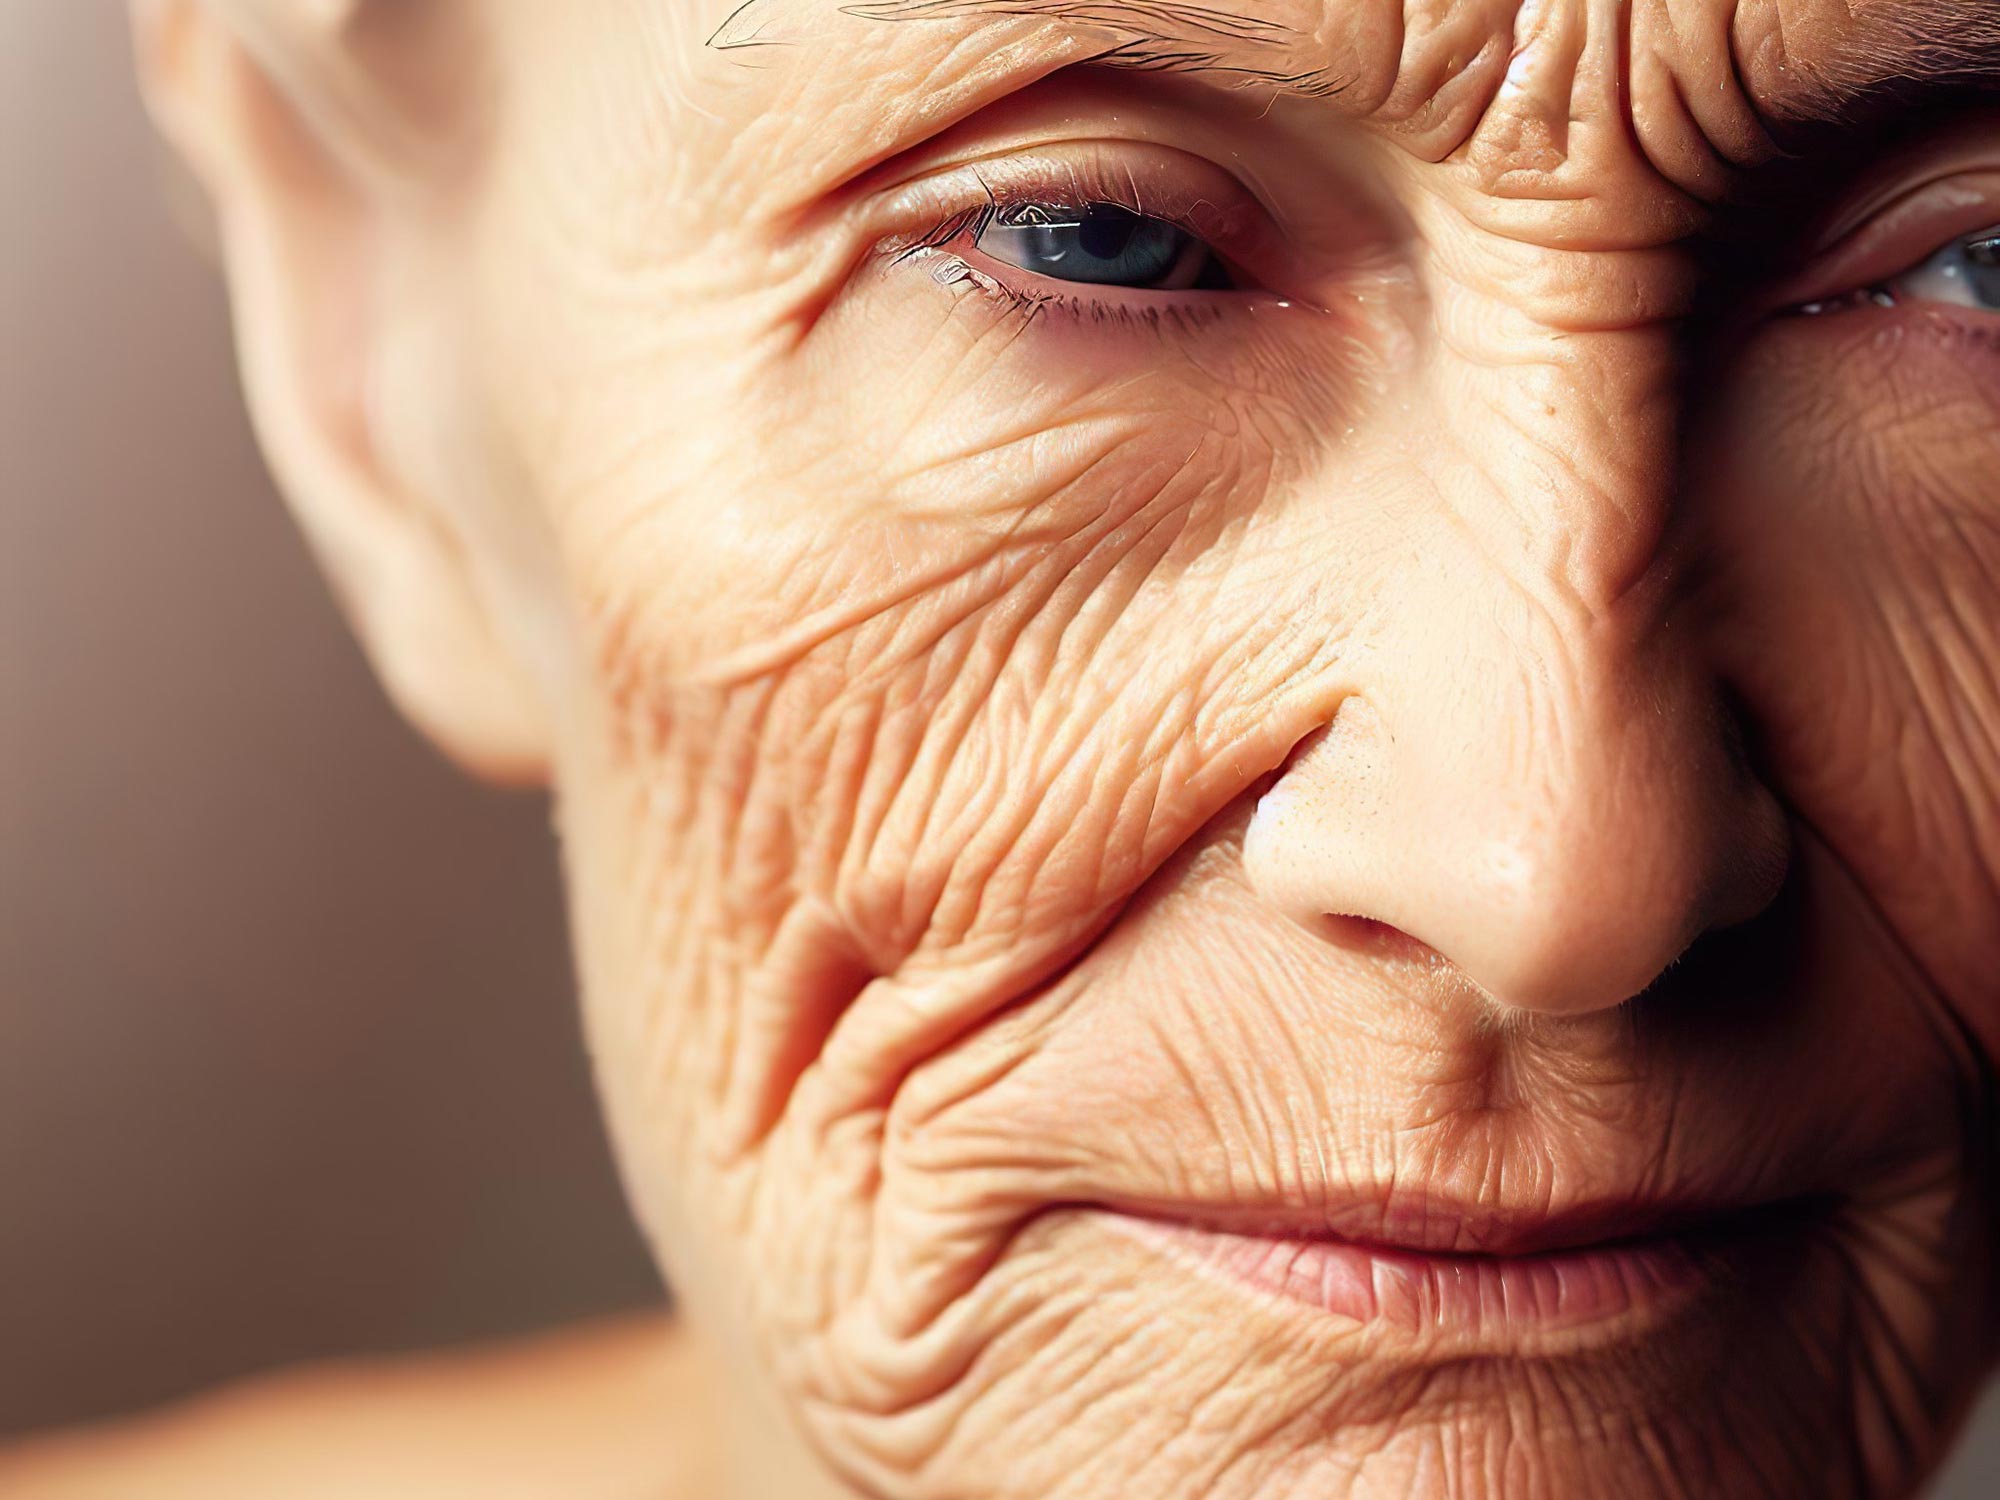 Scientists have discovered a protein that plays a major role in skin aging